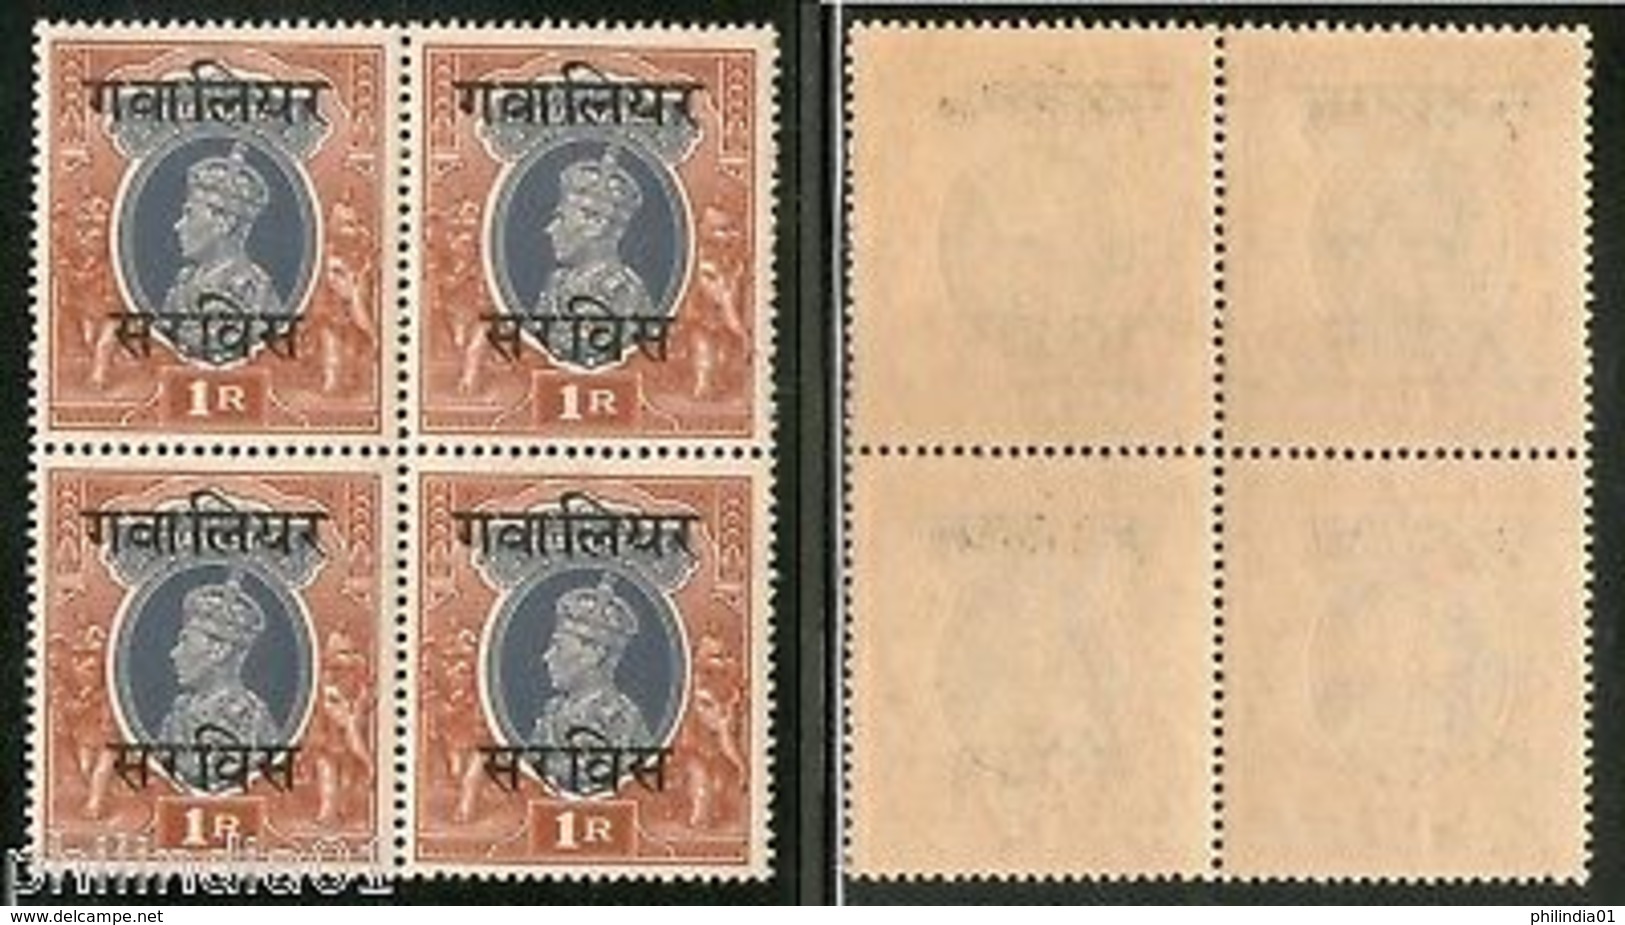 India Gwalior State 1Re KG VI Service Stamp SG O91 / Sc O48 BLK/4 Cat $52 MNH - Gwalior